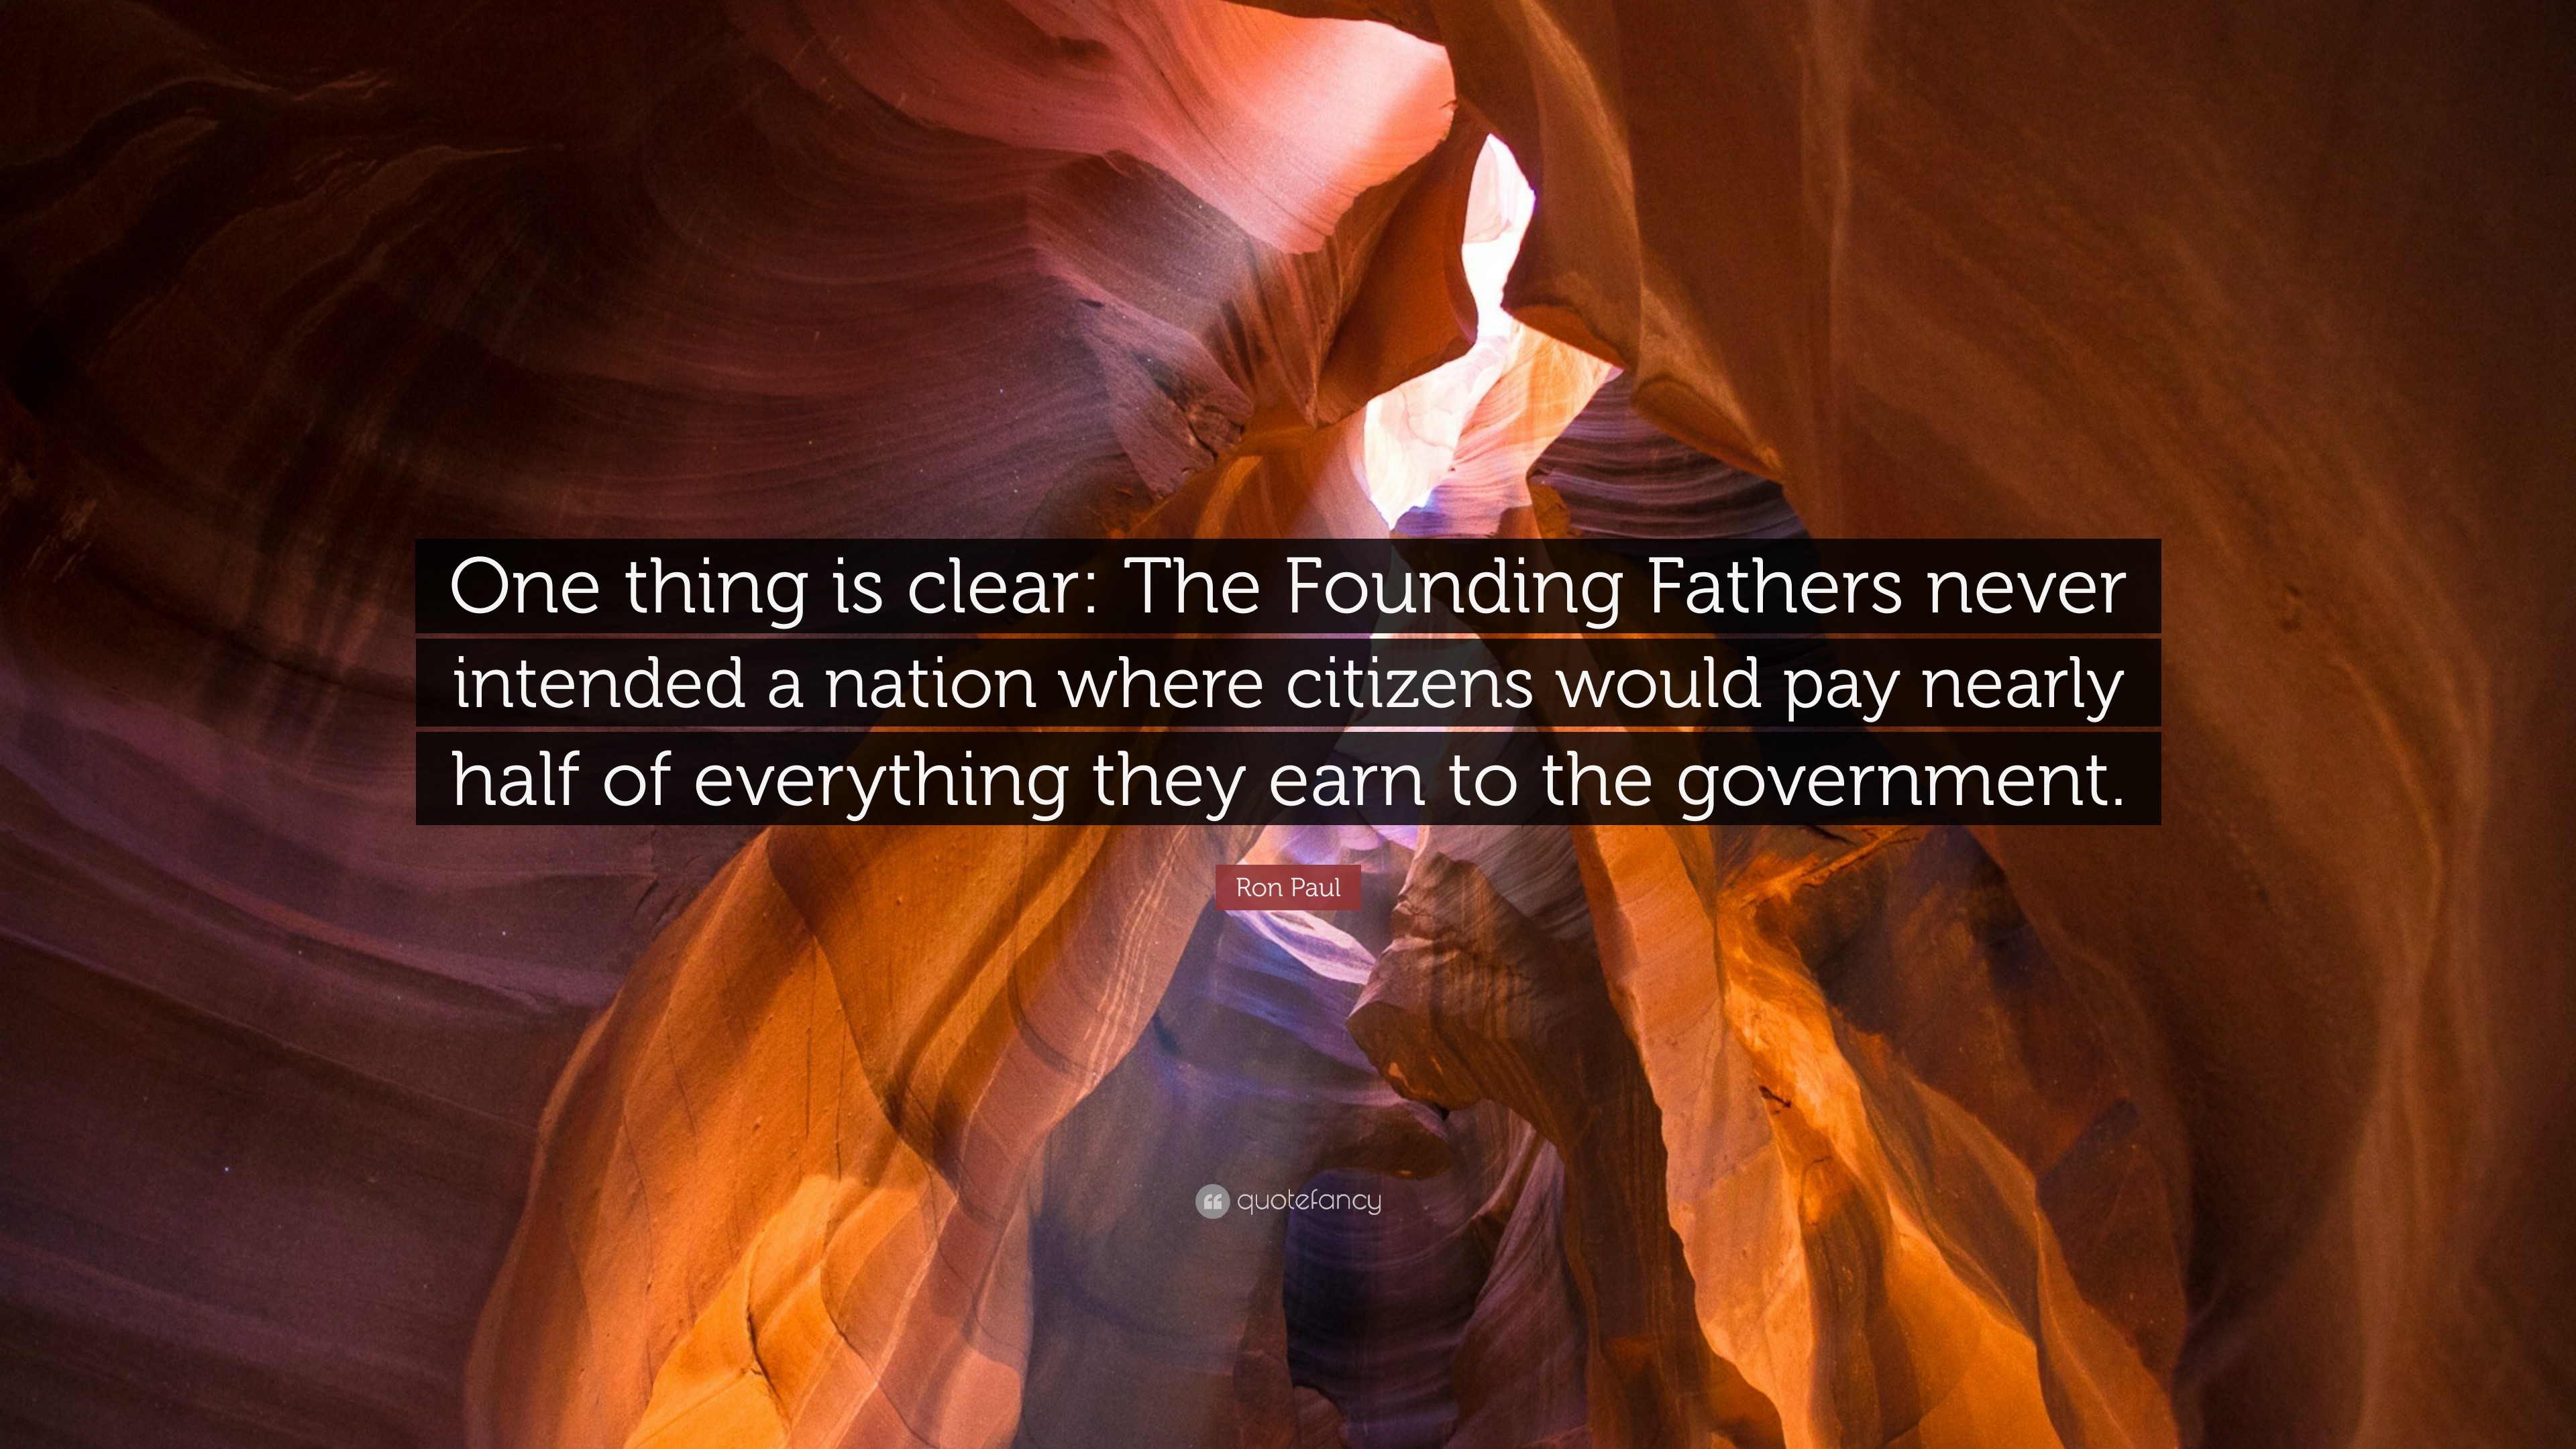 3840x2160 Ron Paul Quote: “One thing is clear: The Founding Fathers never intended a